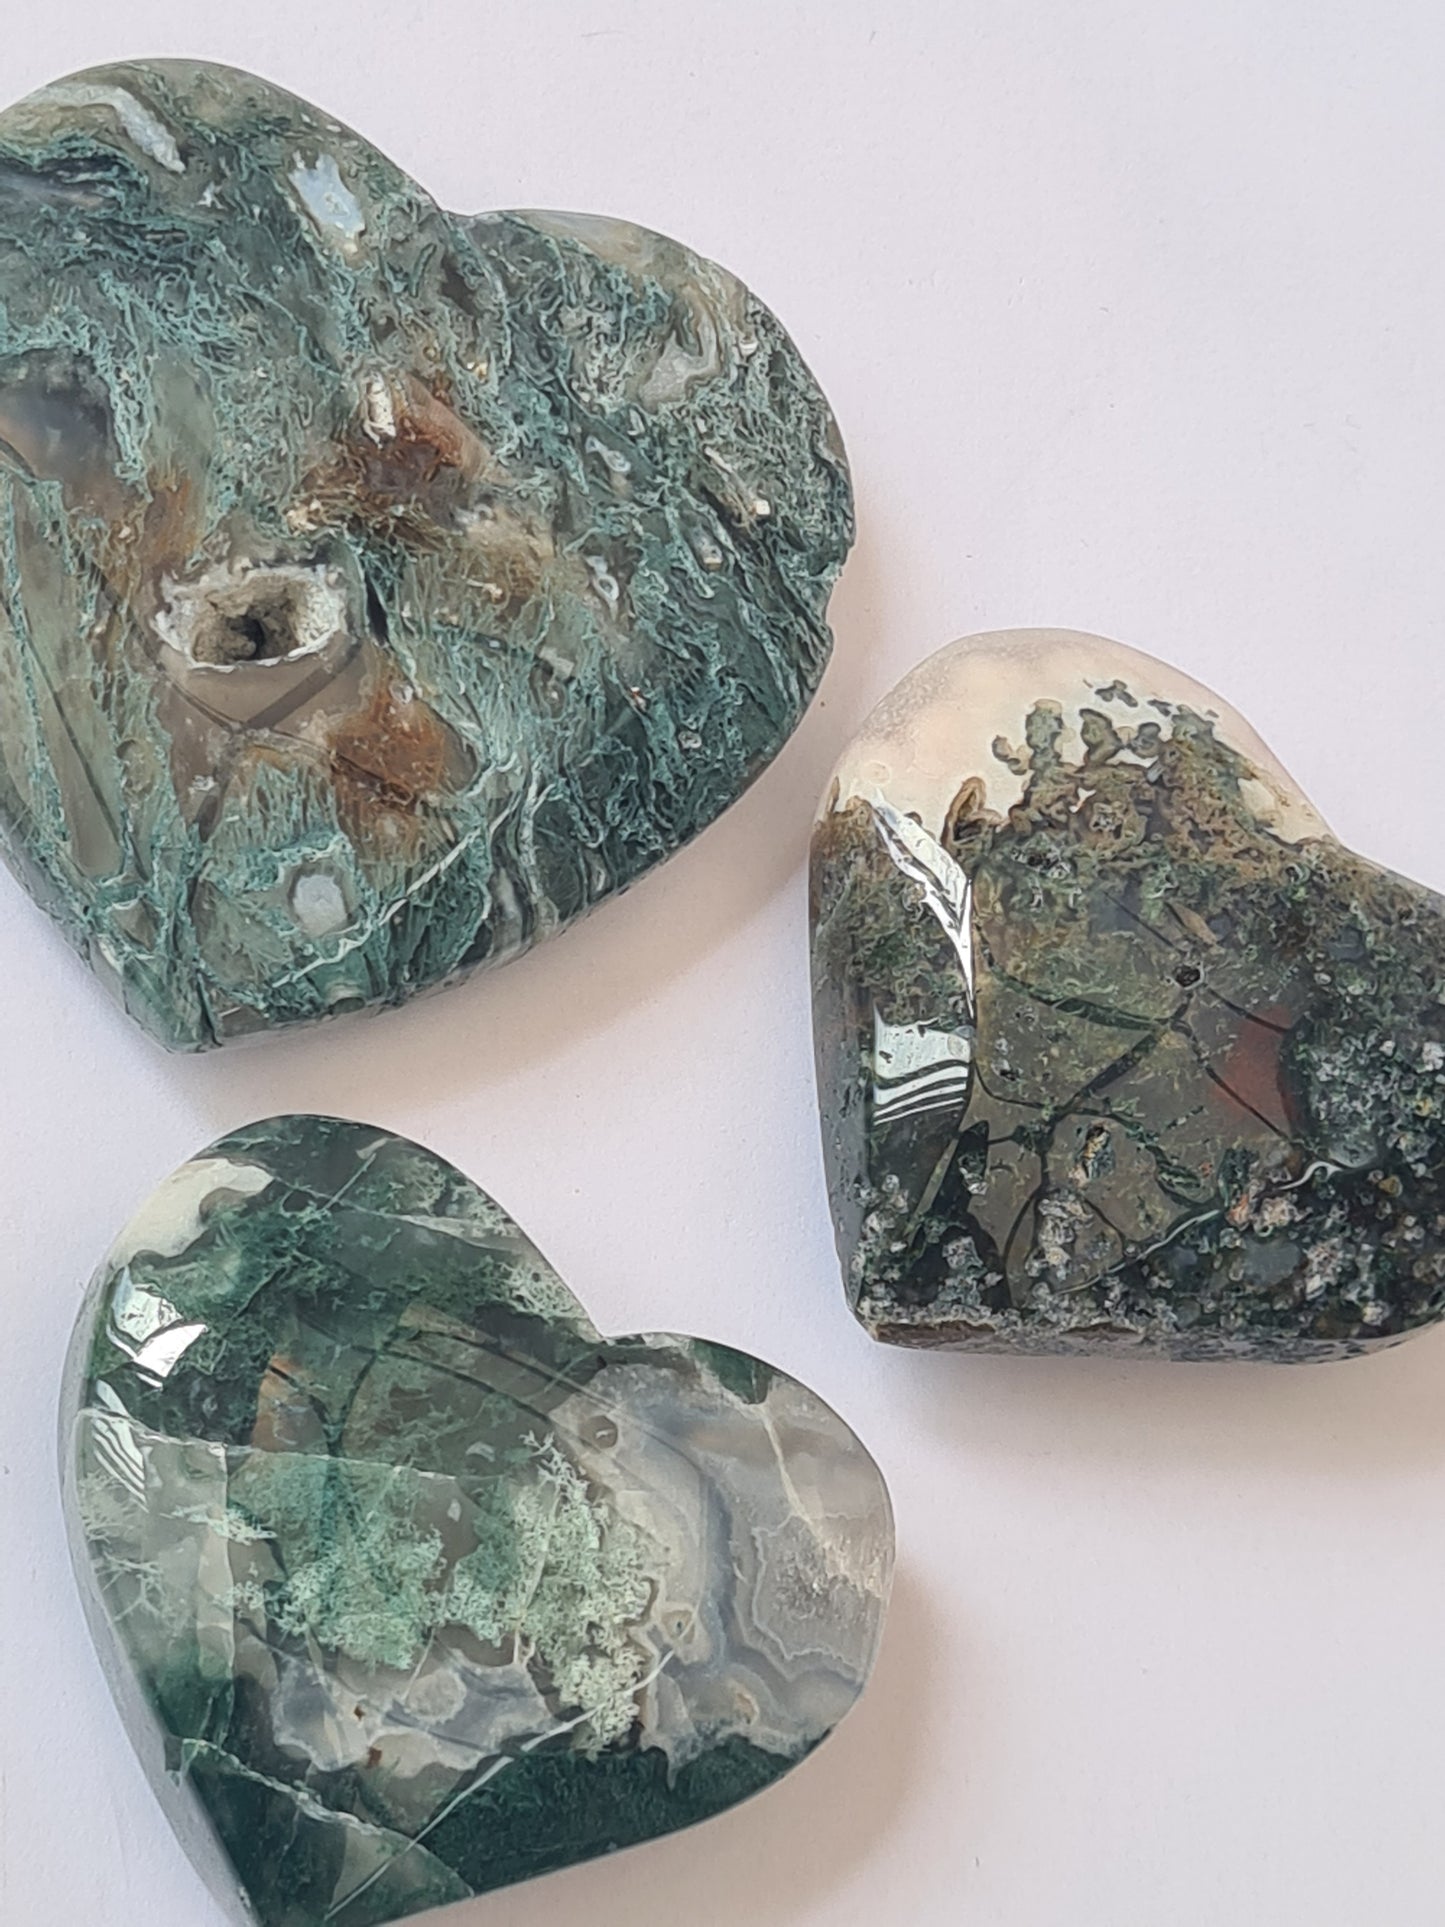 Three moss agate polished hearts, green included agate with chalcedony and caves. On a white background.